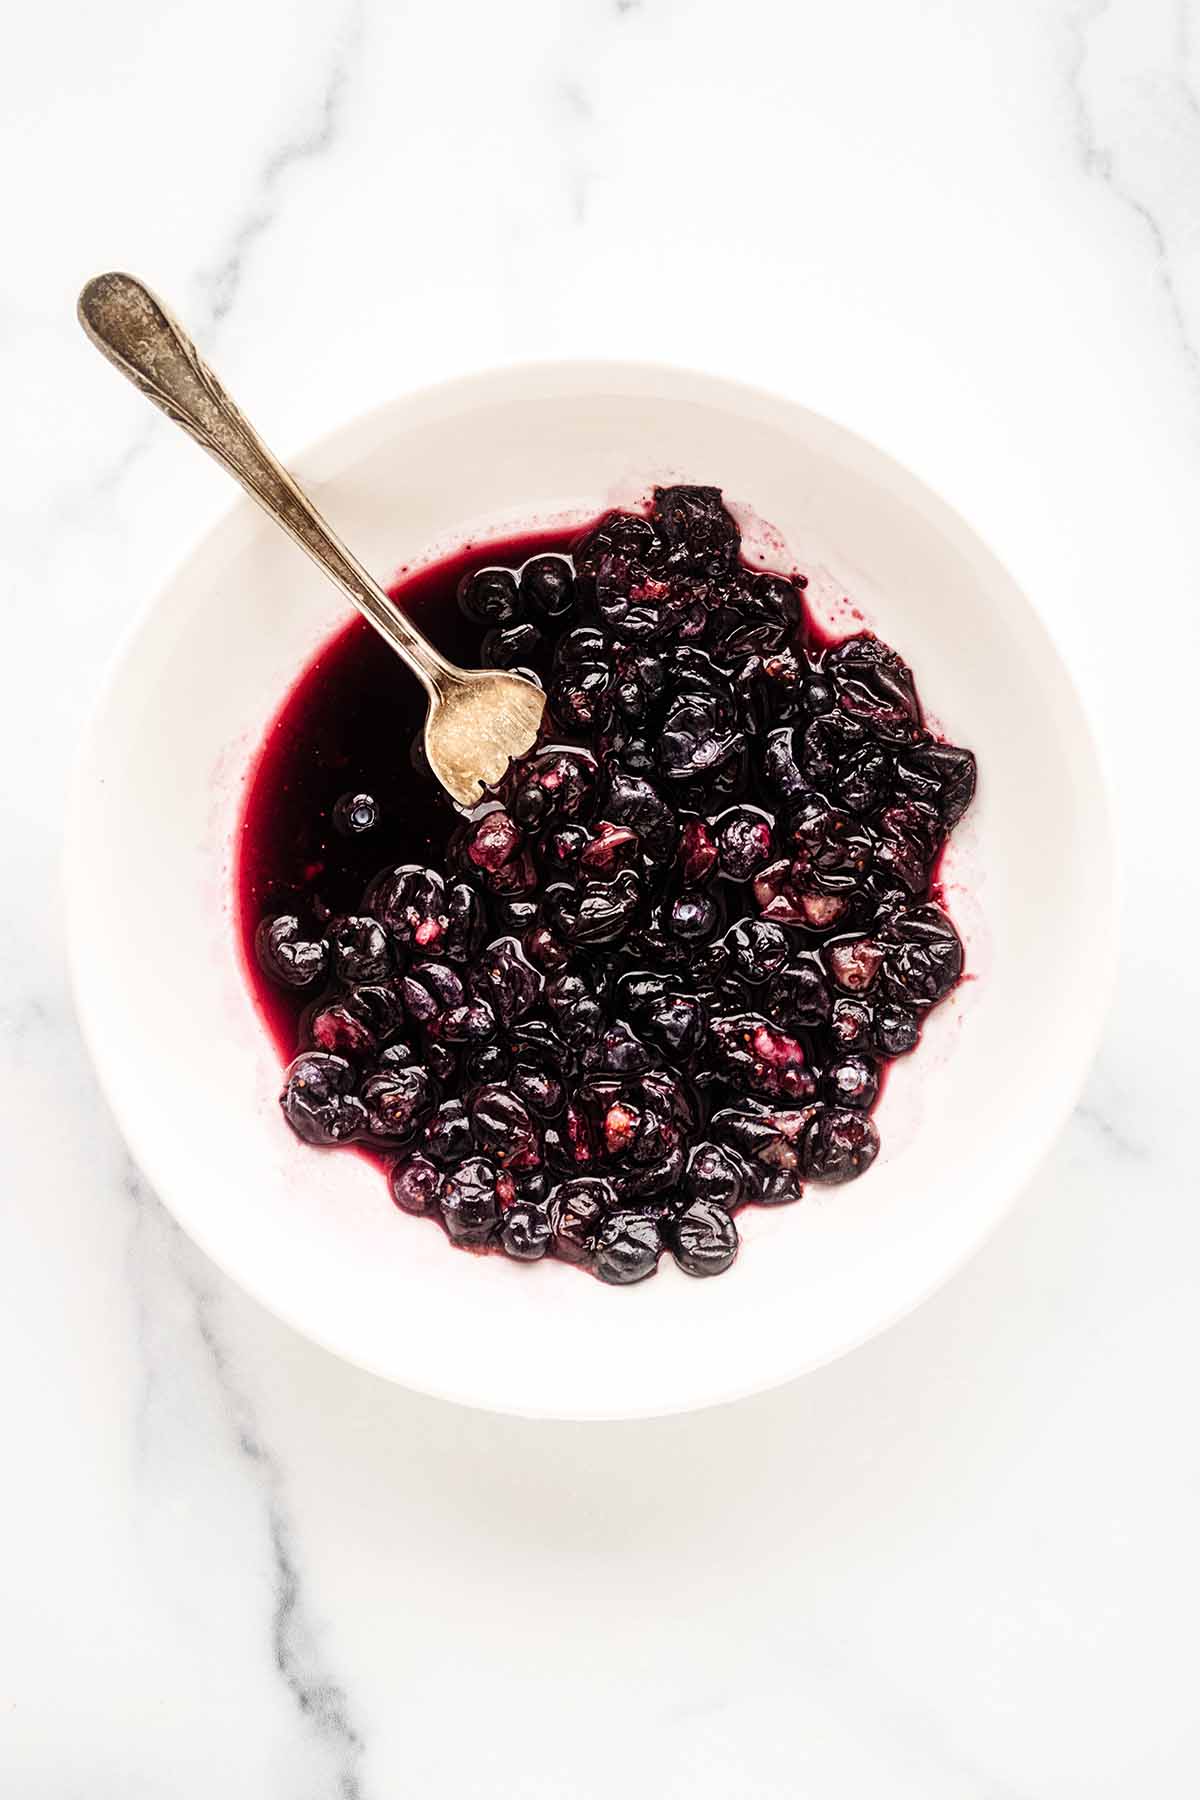 Overhead view of blueberries being crushed with a fork in a white bowl